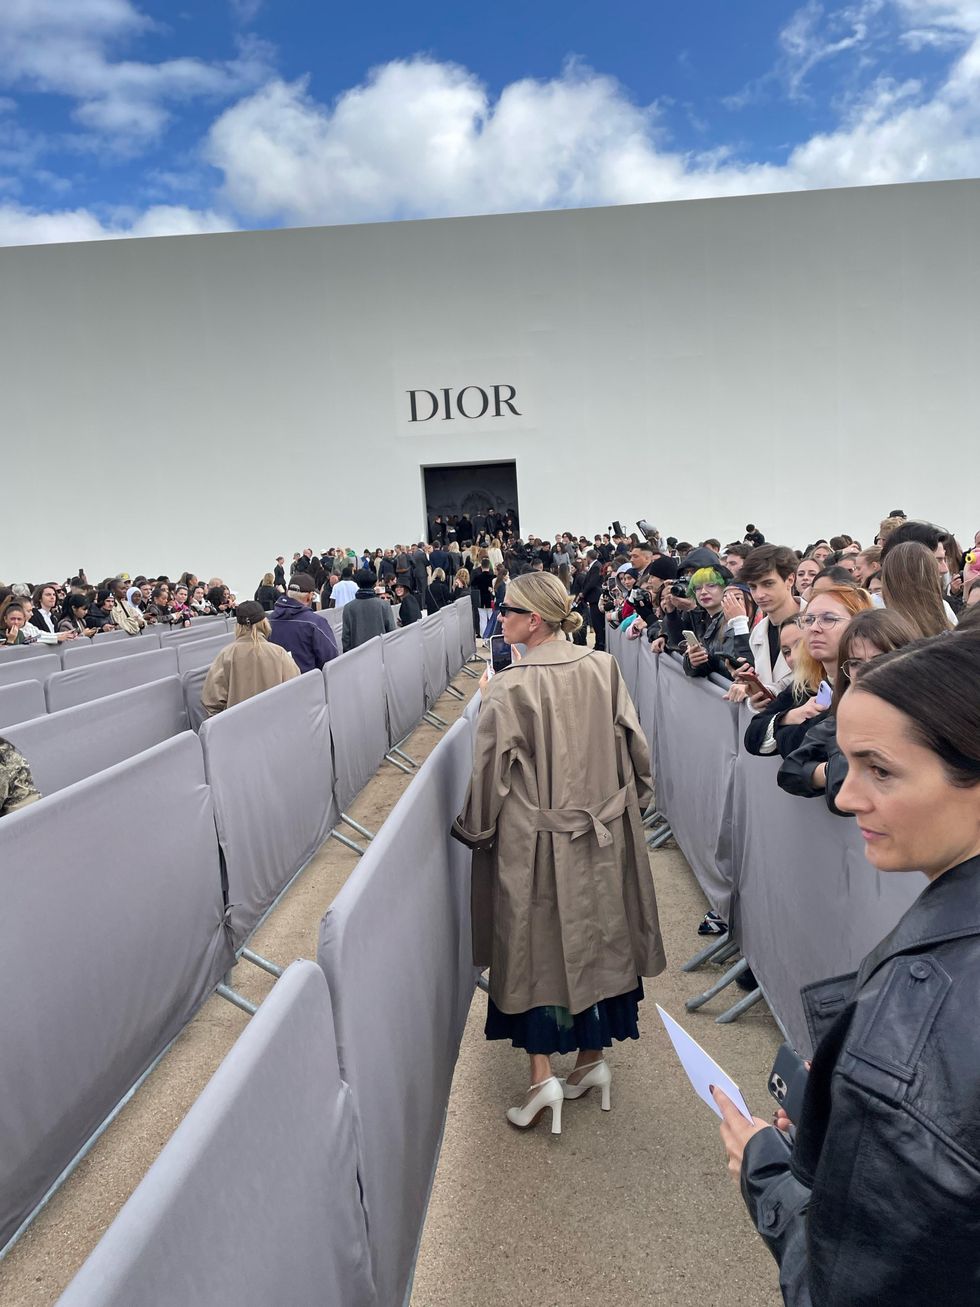 Hollywood’s Top Celebrity Stylists Reflect on the Christian Dior Show in Paris